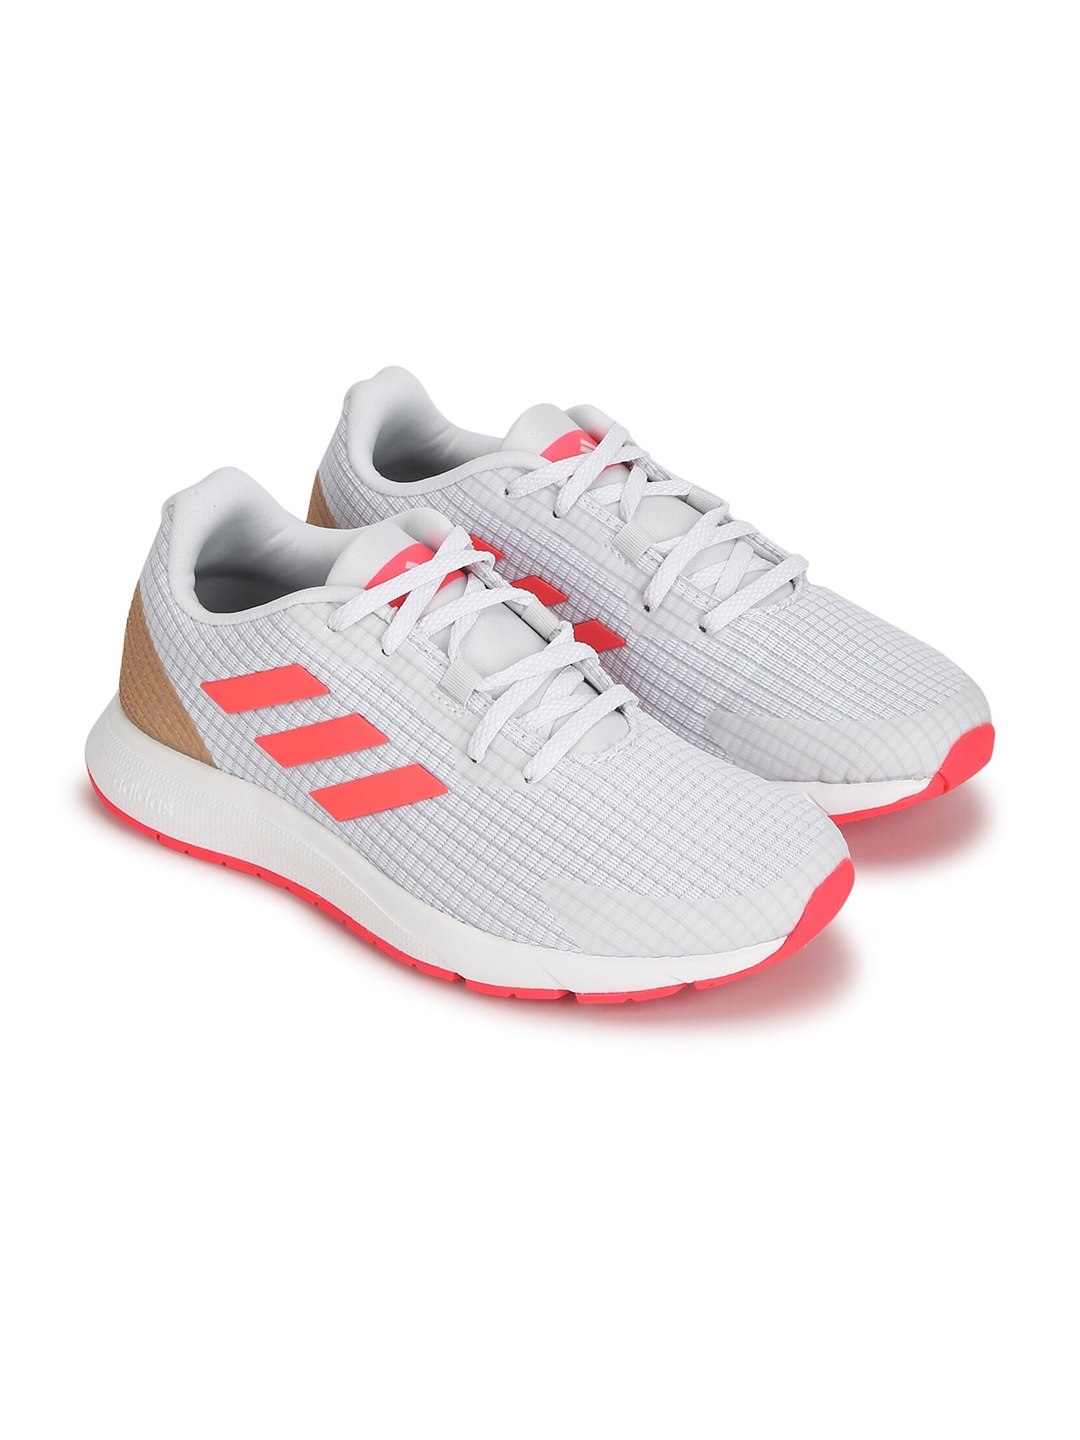 Buy ADIDAS Women White Textile Running Shoes - Sports Shoes for Women ...